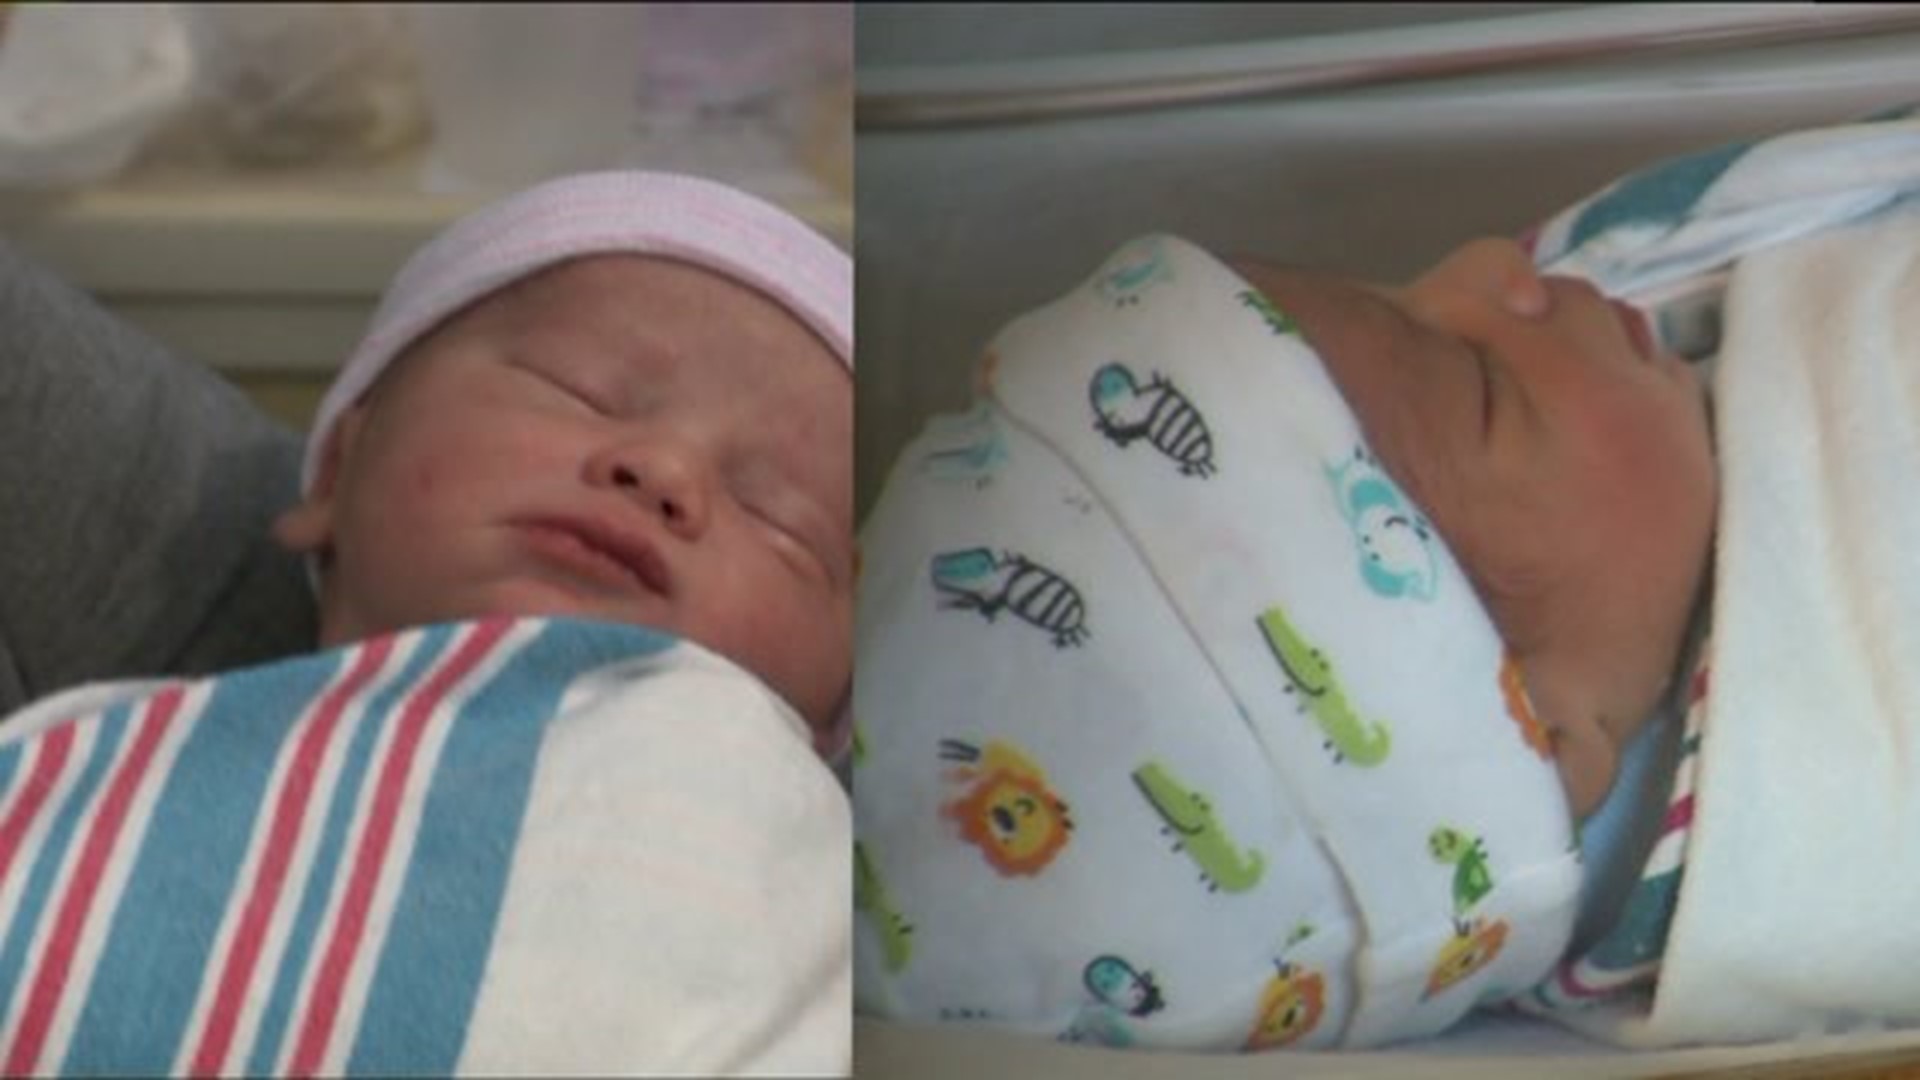 Leaplings hold special honor as they enter the world on February 29